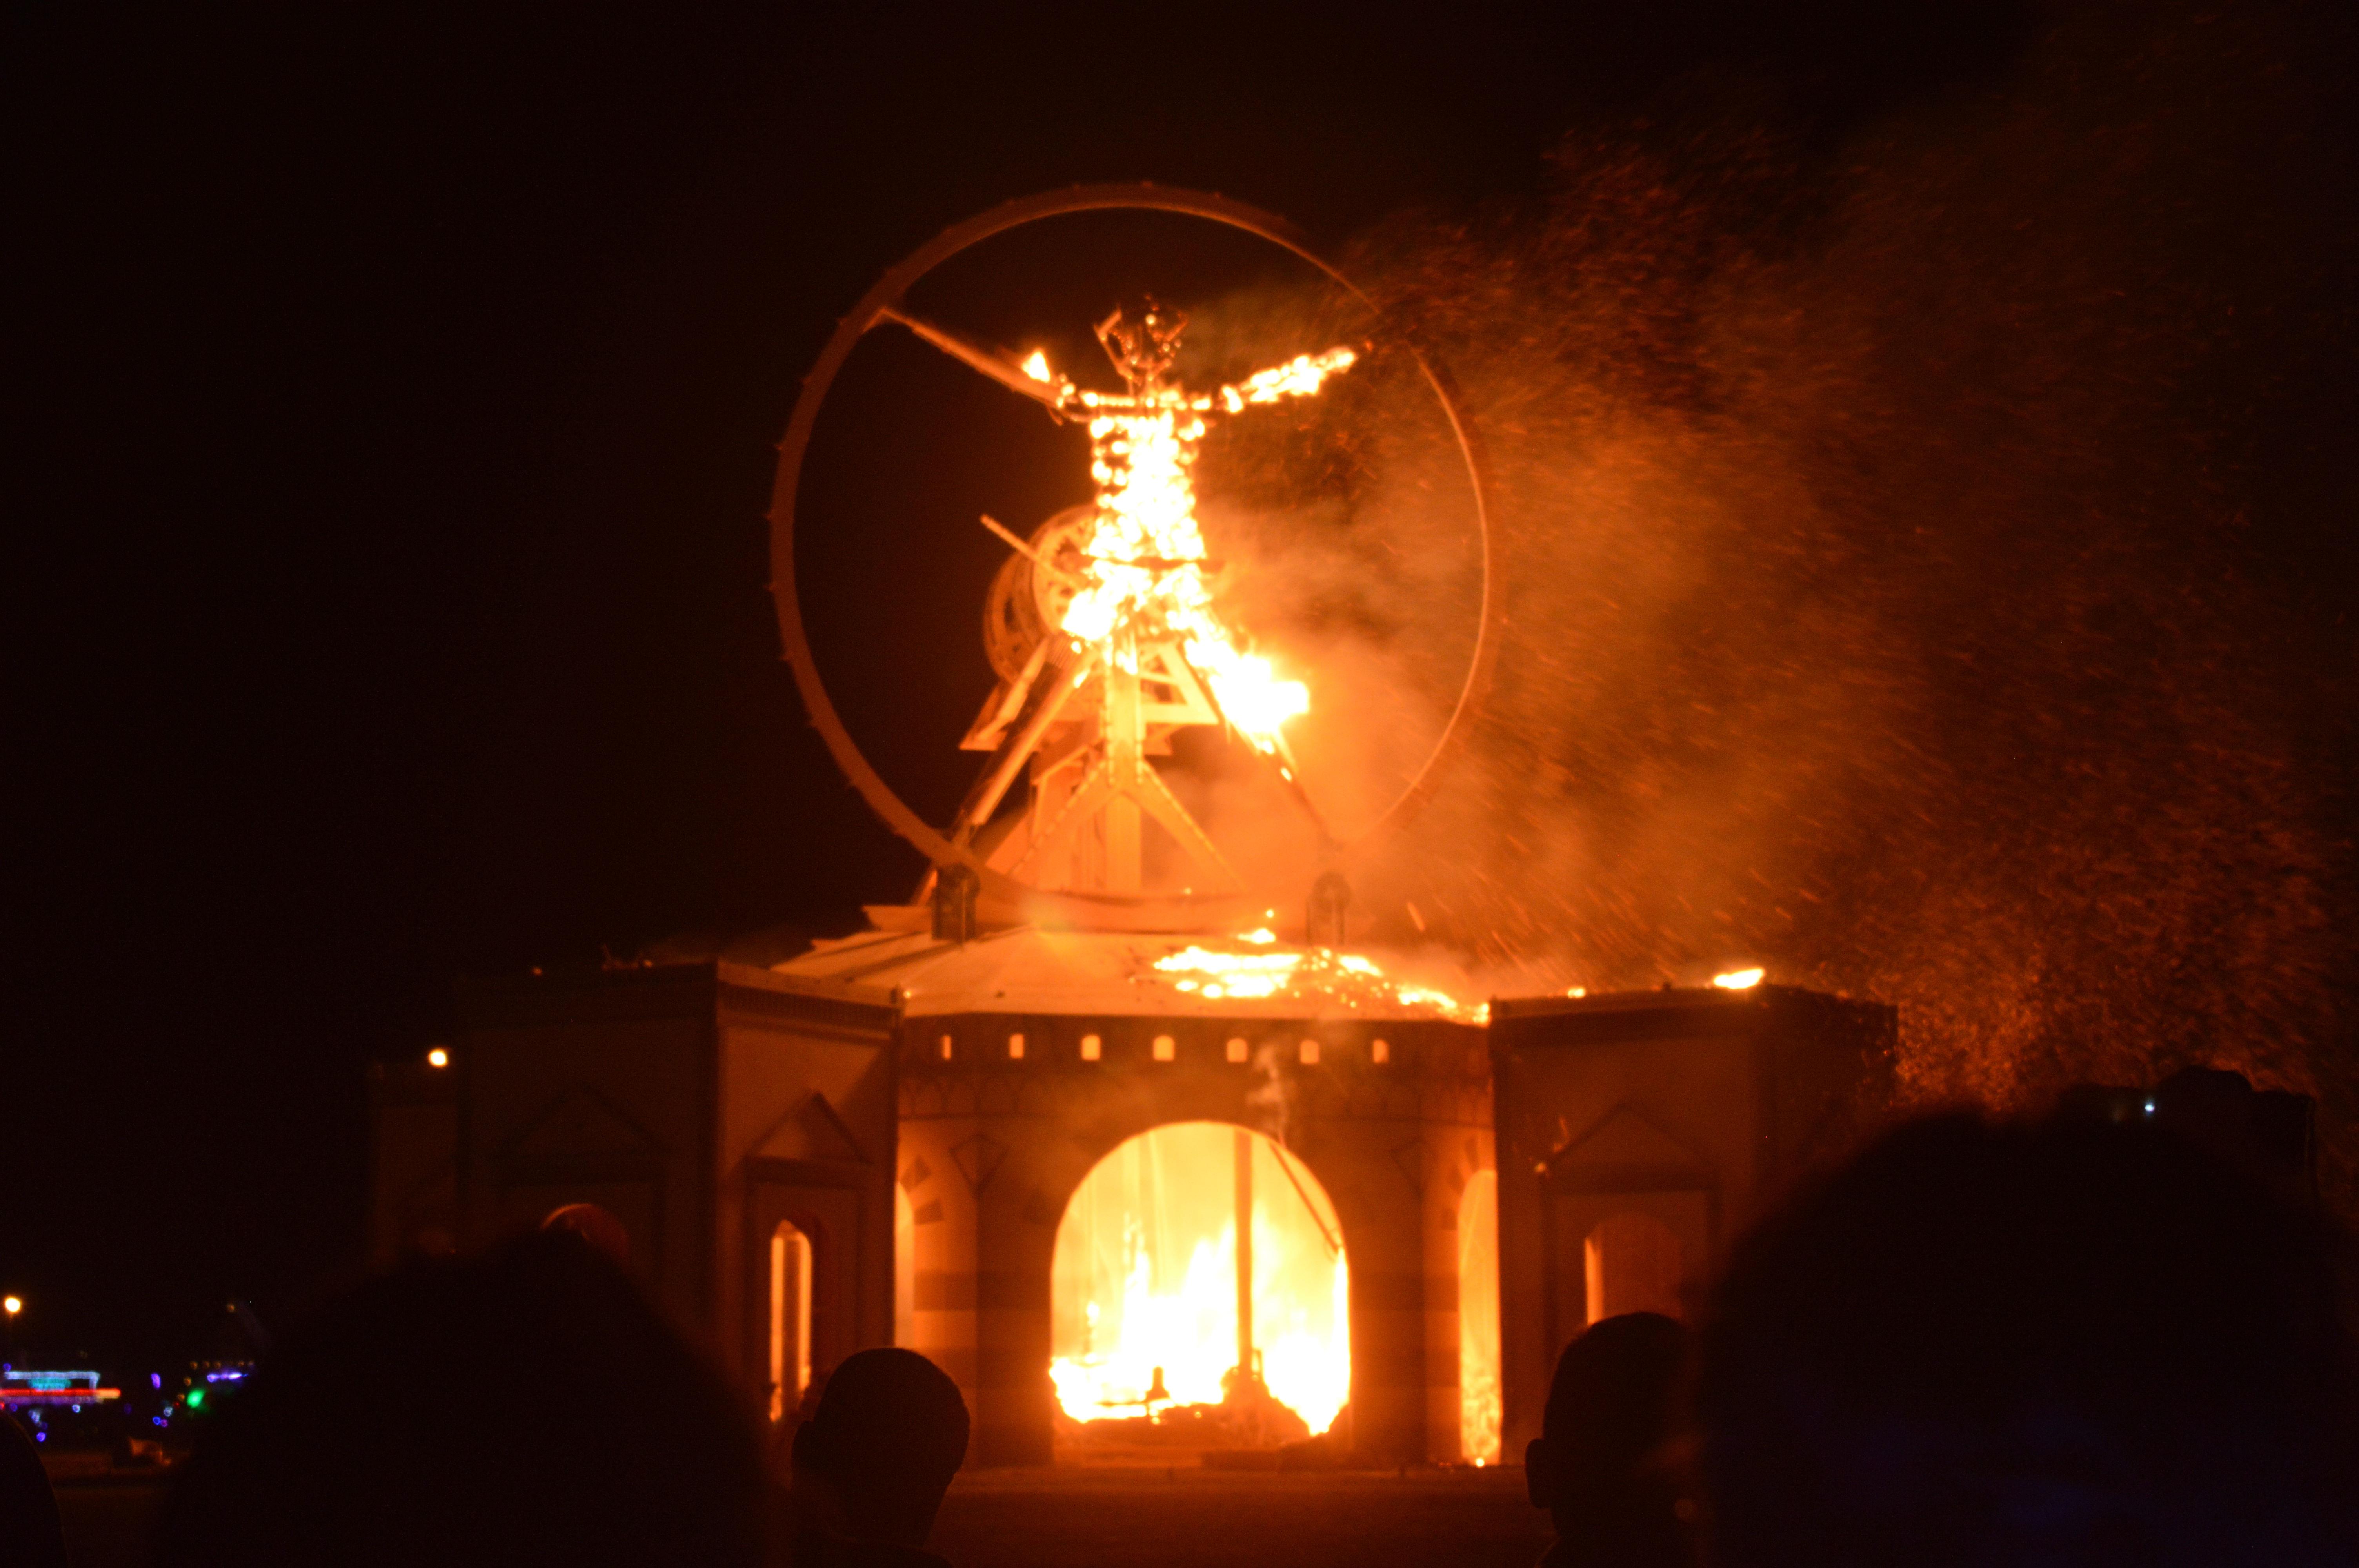 Burning Man Festival 2016 Comes to an End